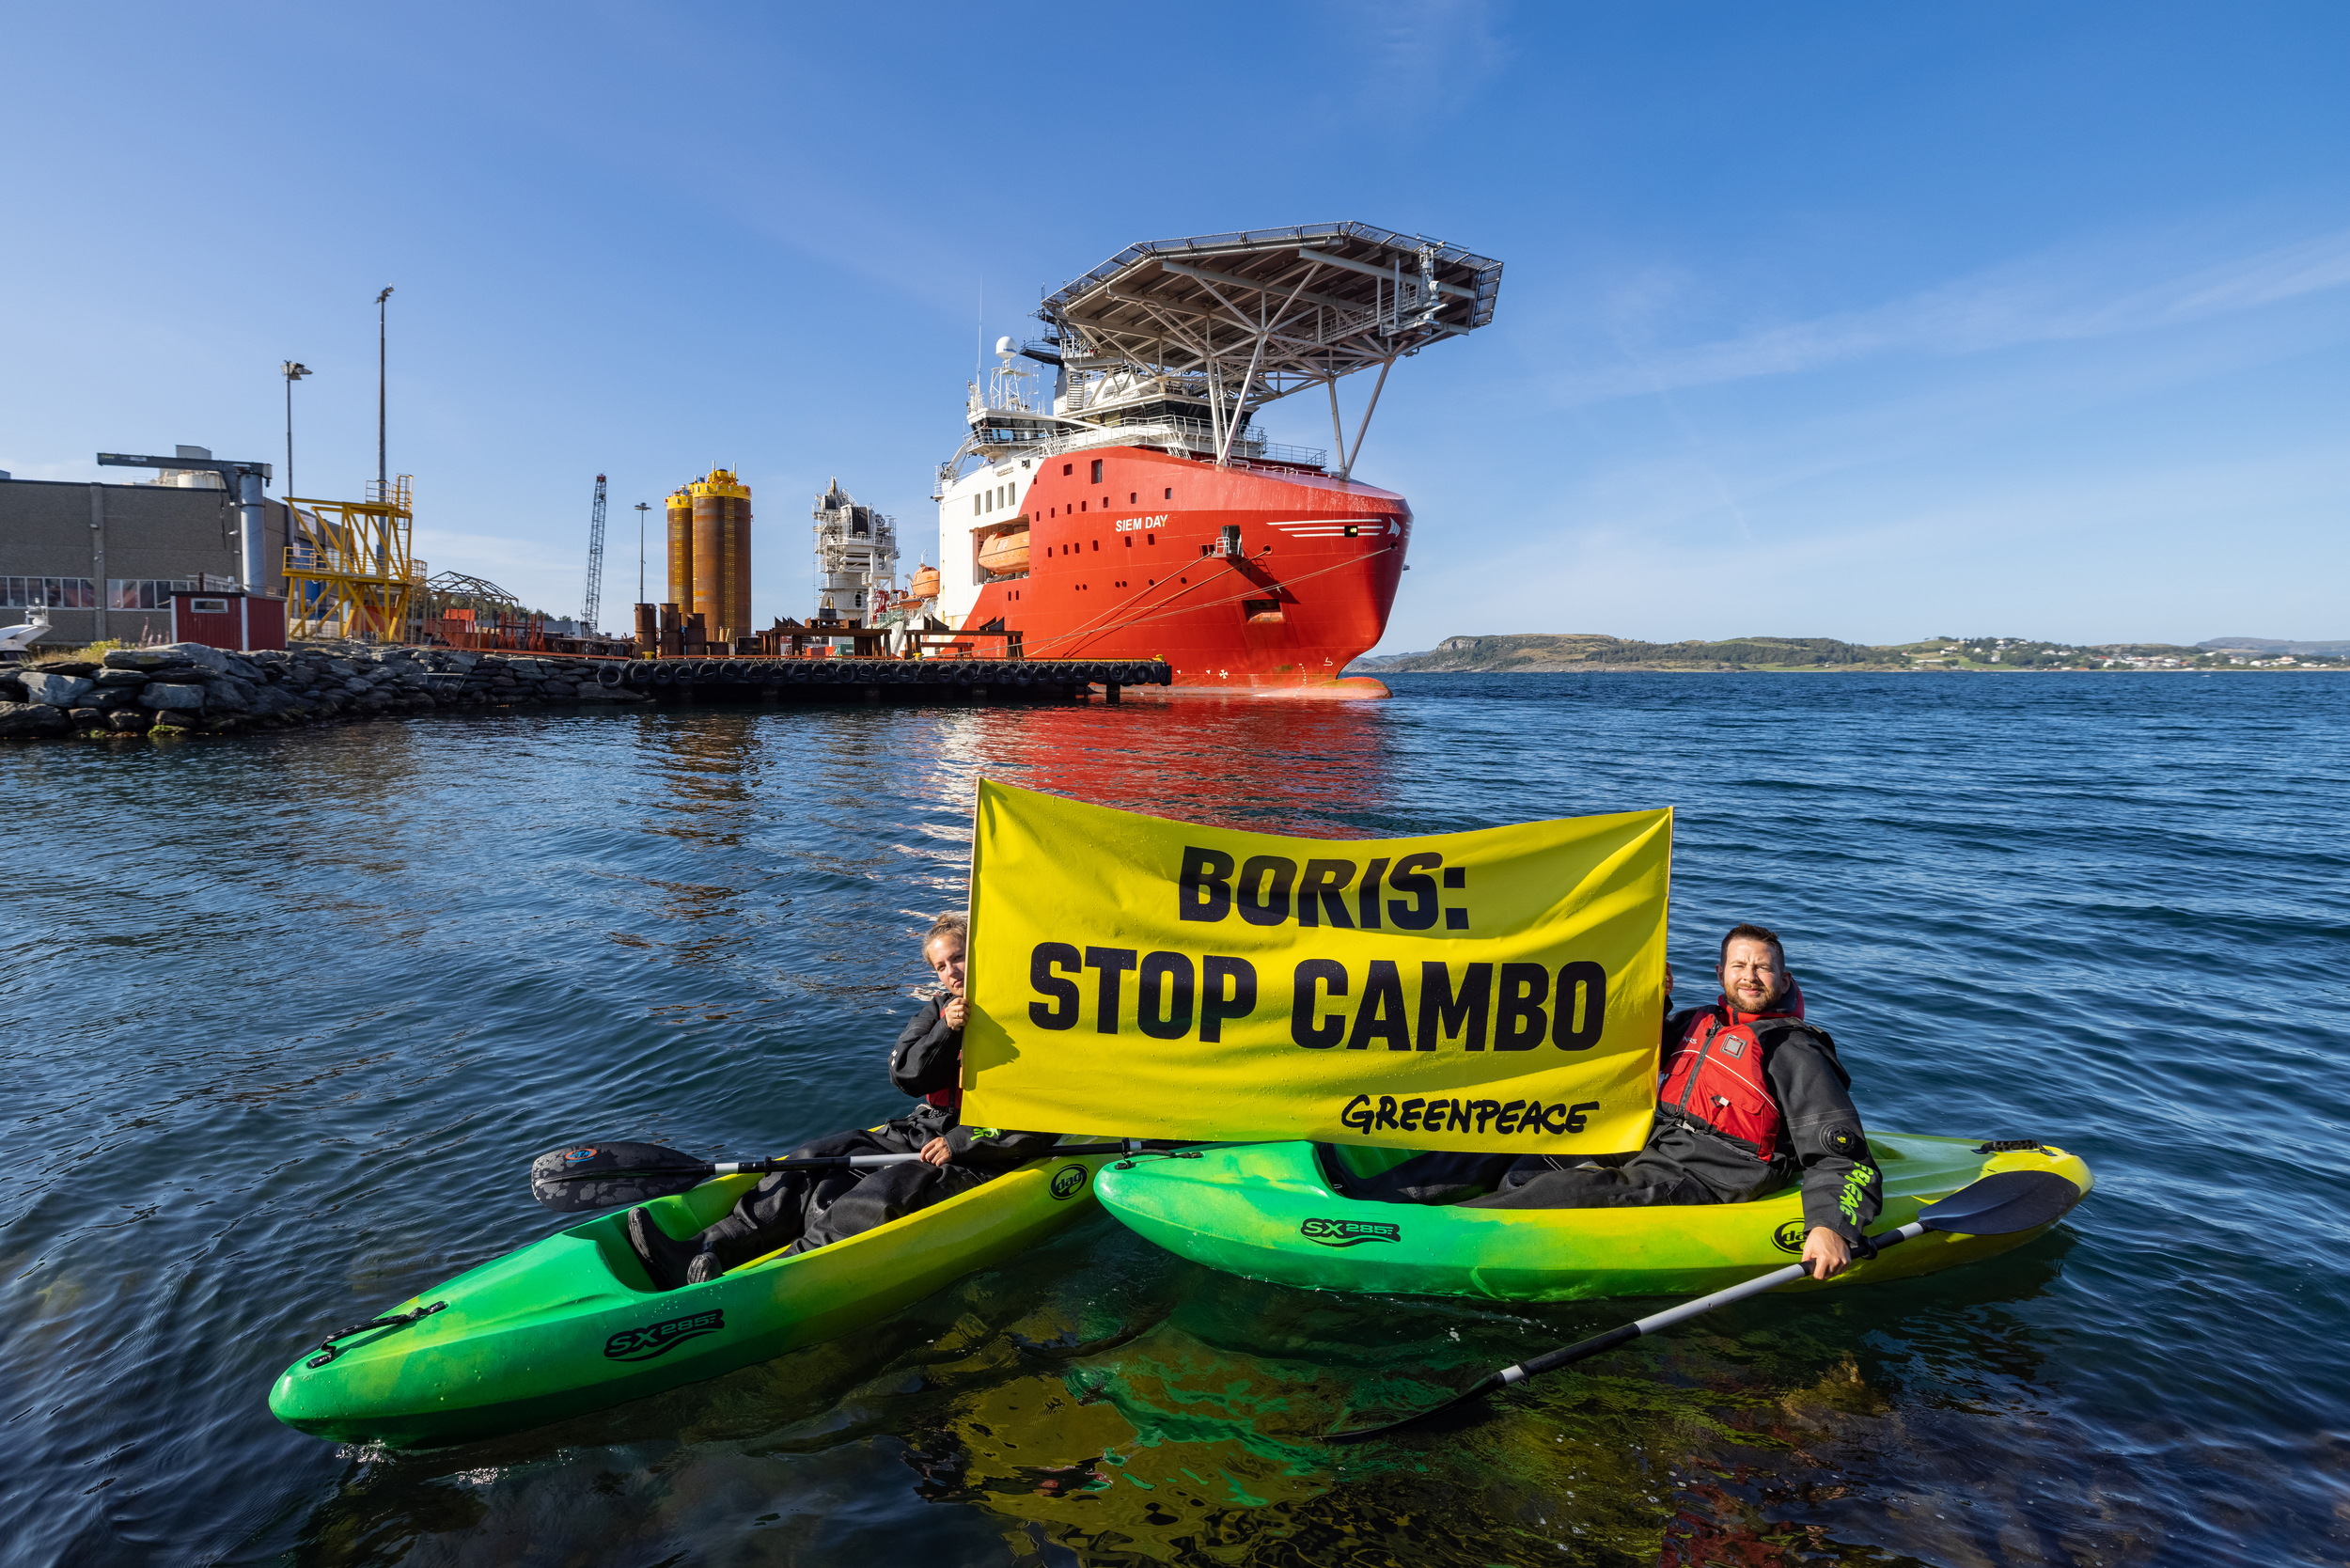 Two people in kayaks hold up a sign reading "Boris: Stop Cambo". Behind them is a massive ship with large equipment for an off-shore rig.